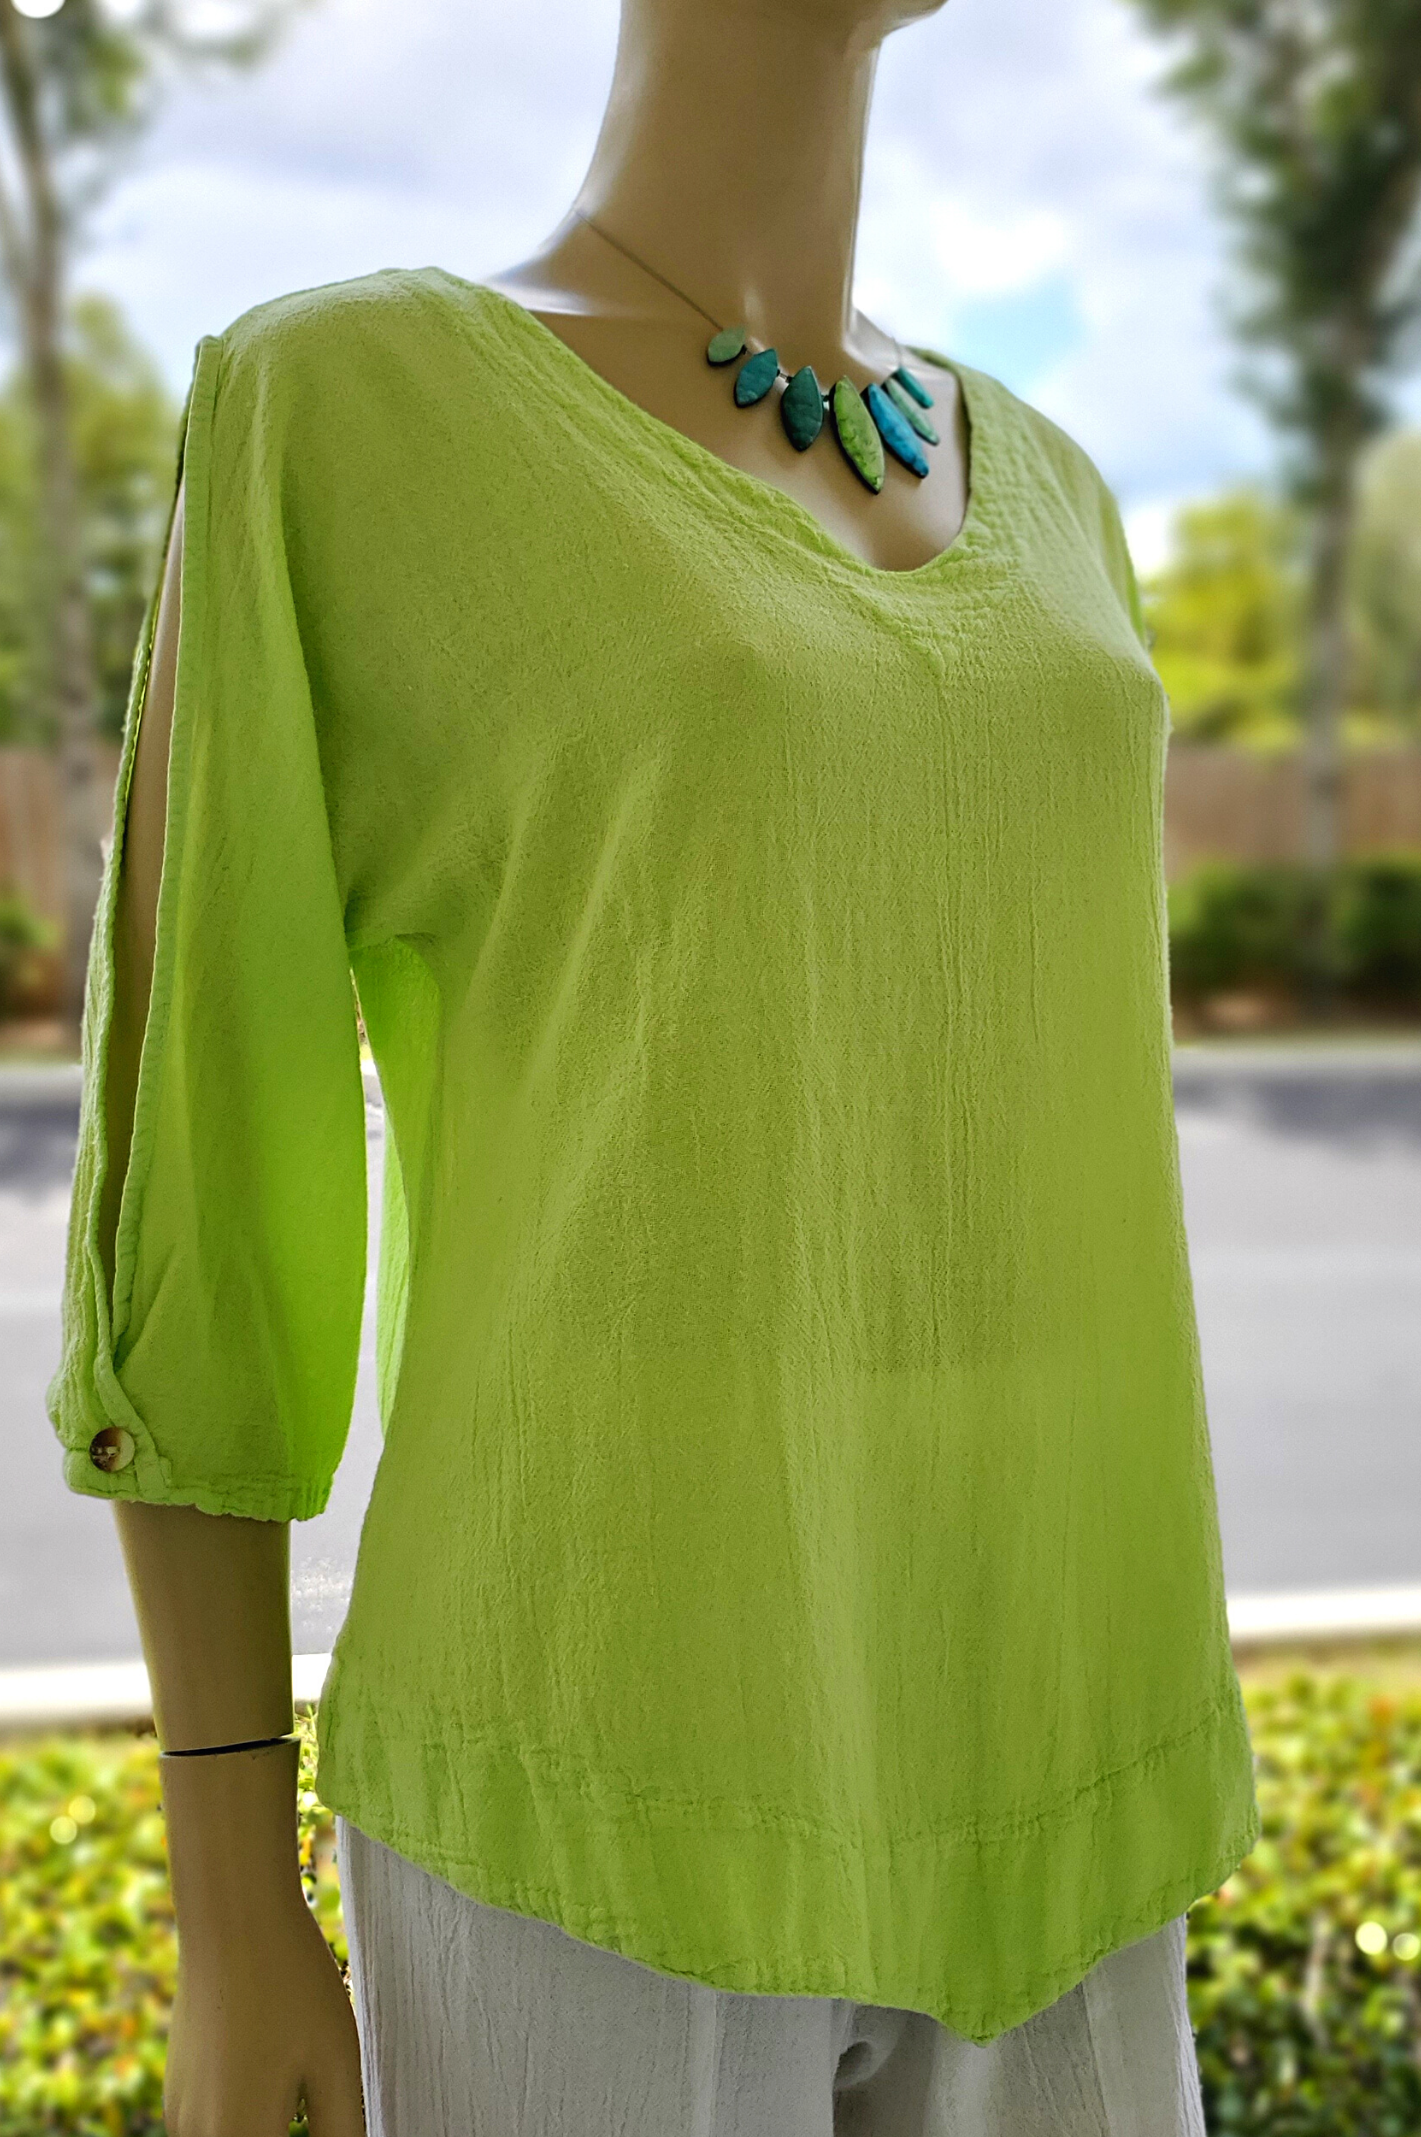 Barbara in New Colors, Our Cut-Out 3/4 Sleeve Top